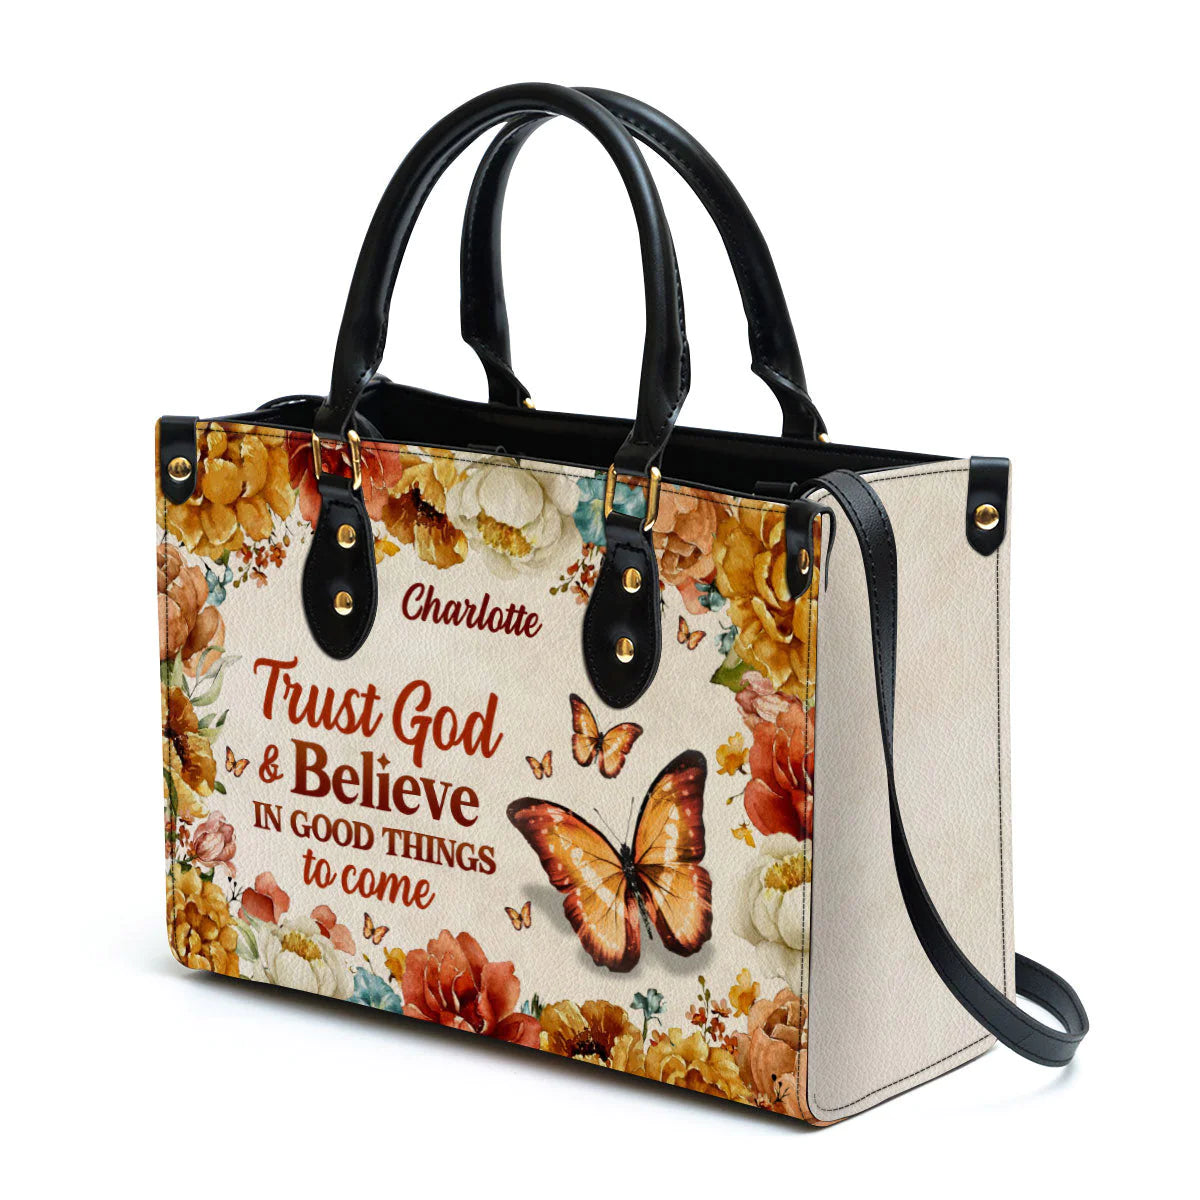 Christianart Handbag, Trust God And Believe In Good Things To Come, Personalized Gifts, Gifts for Women, Christmas Gift. - Christian Art Bag